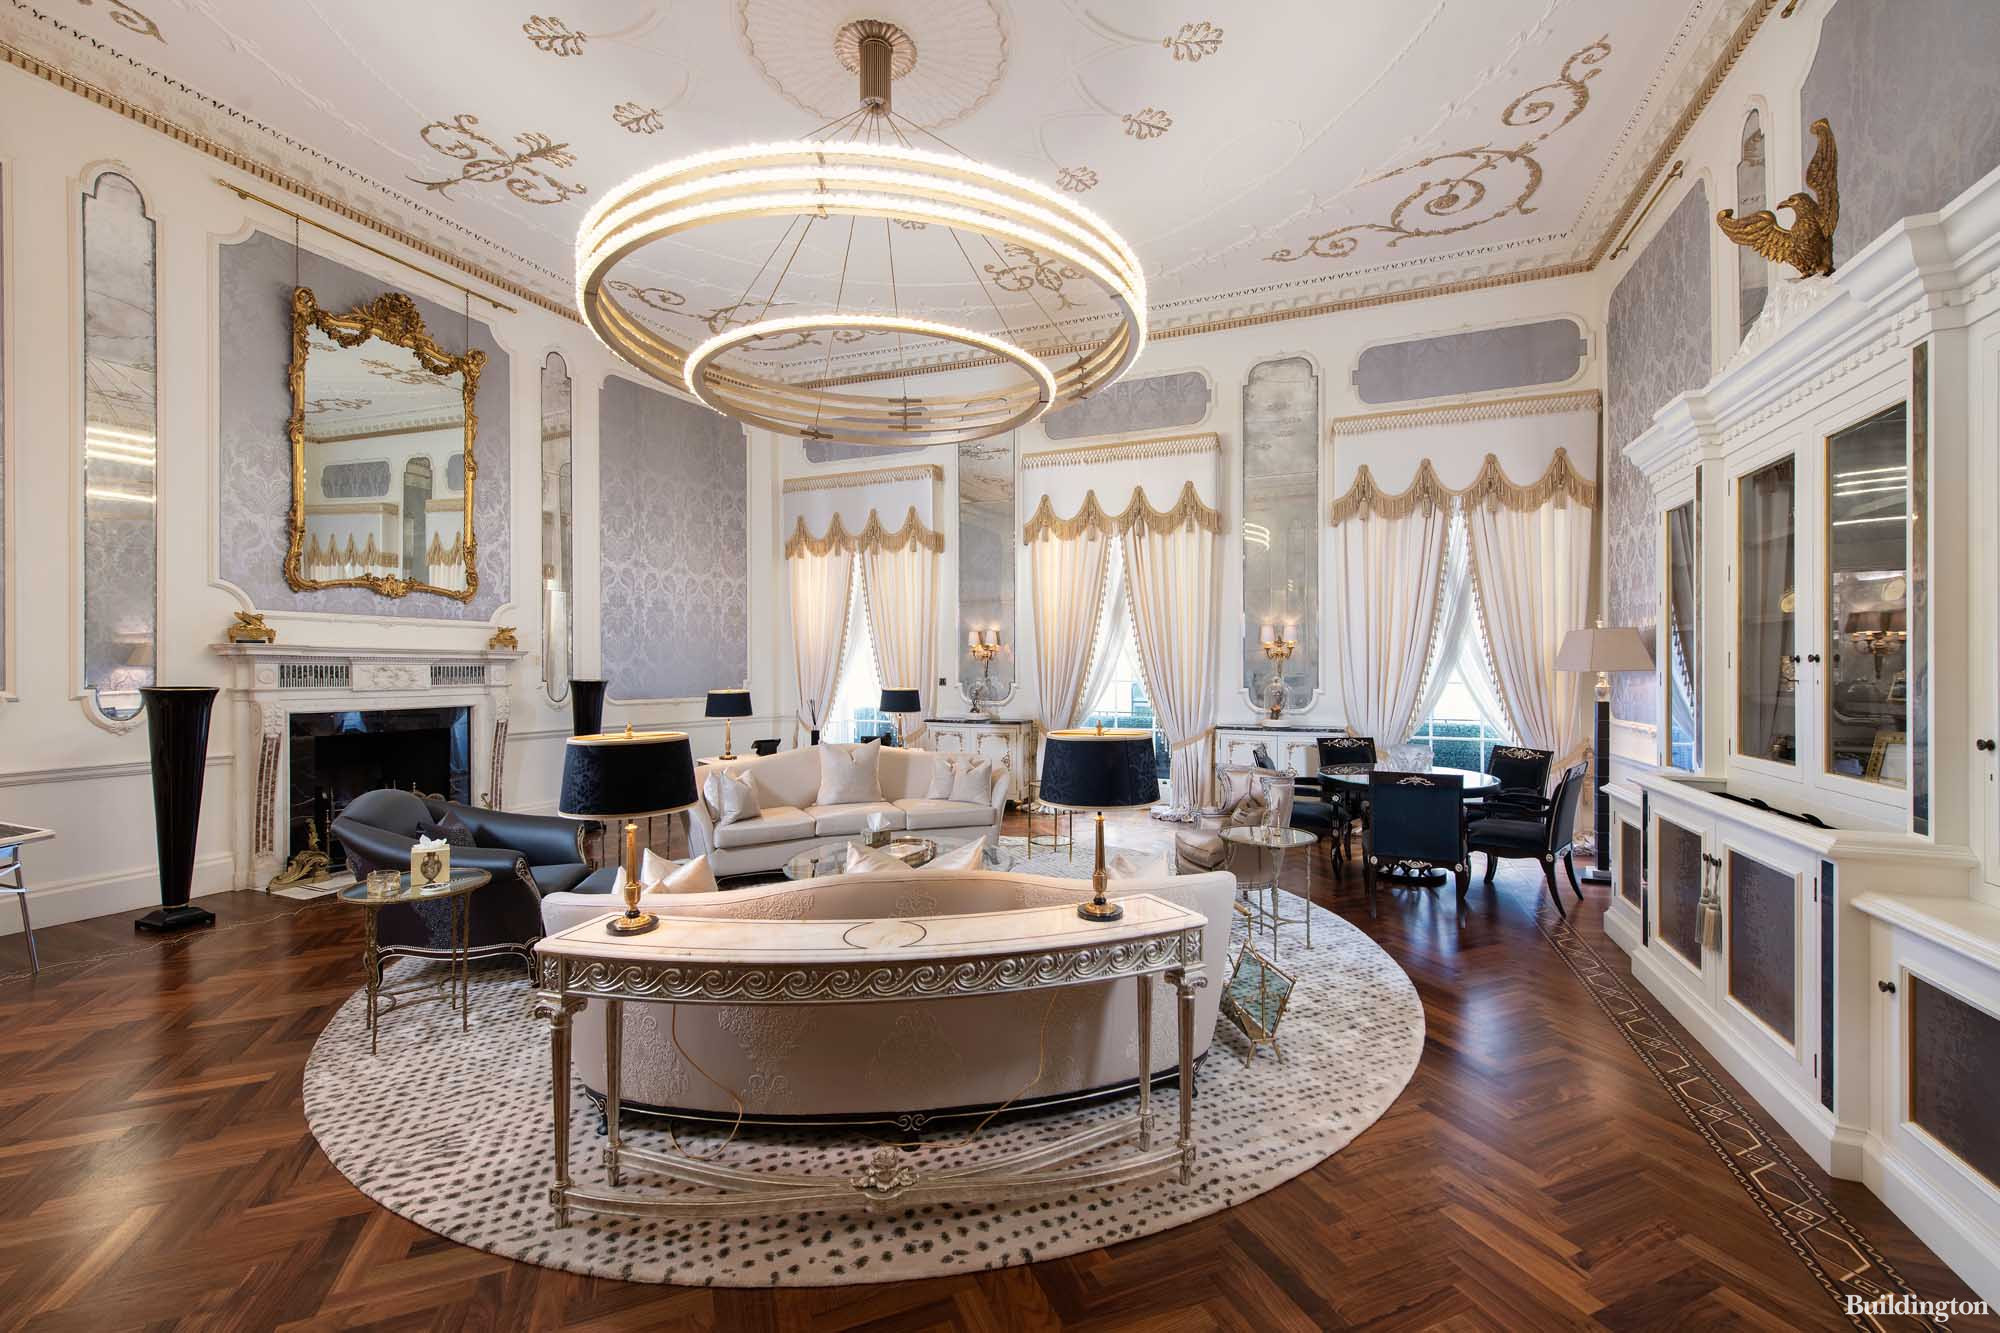 Designer Tom Ford moved into Gucci Group mansion at 5 Grafton Street and its main first floor drawing room in 1998. The room has magnificent 20ft high gold-leaf ceiling with ornate Joseph Rose plasterwork, full height windows, parquet flooring and Georgian fireplaces. 